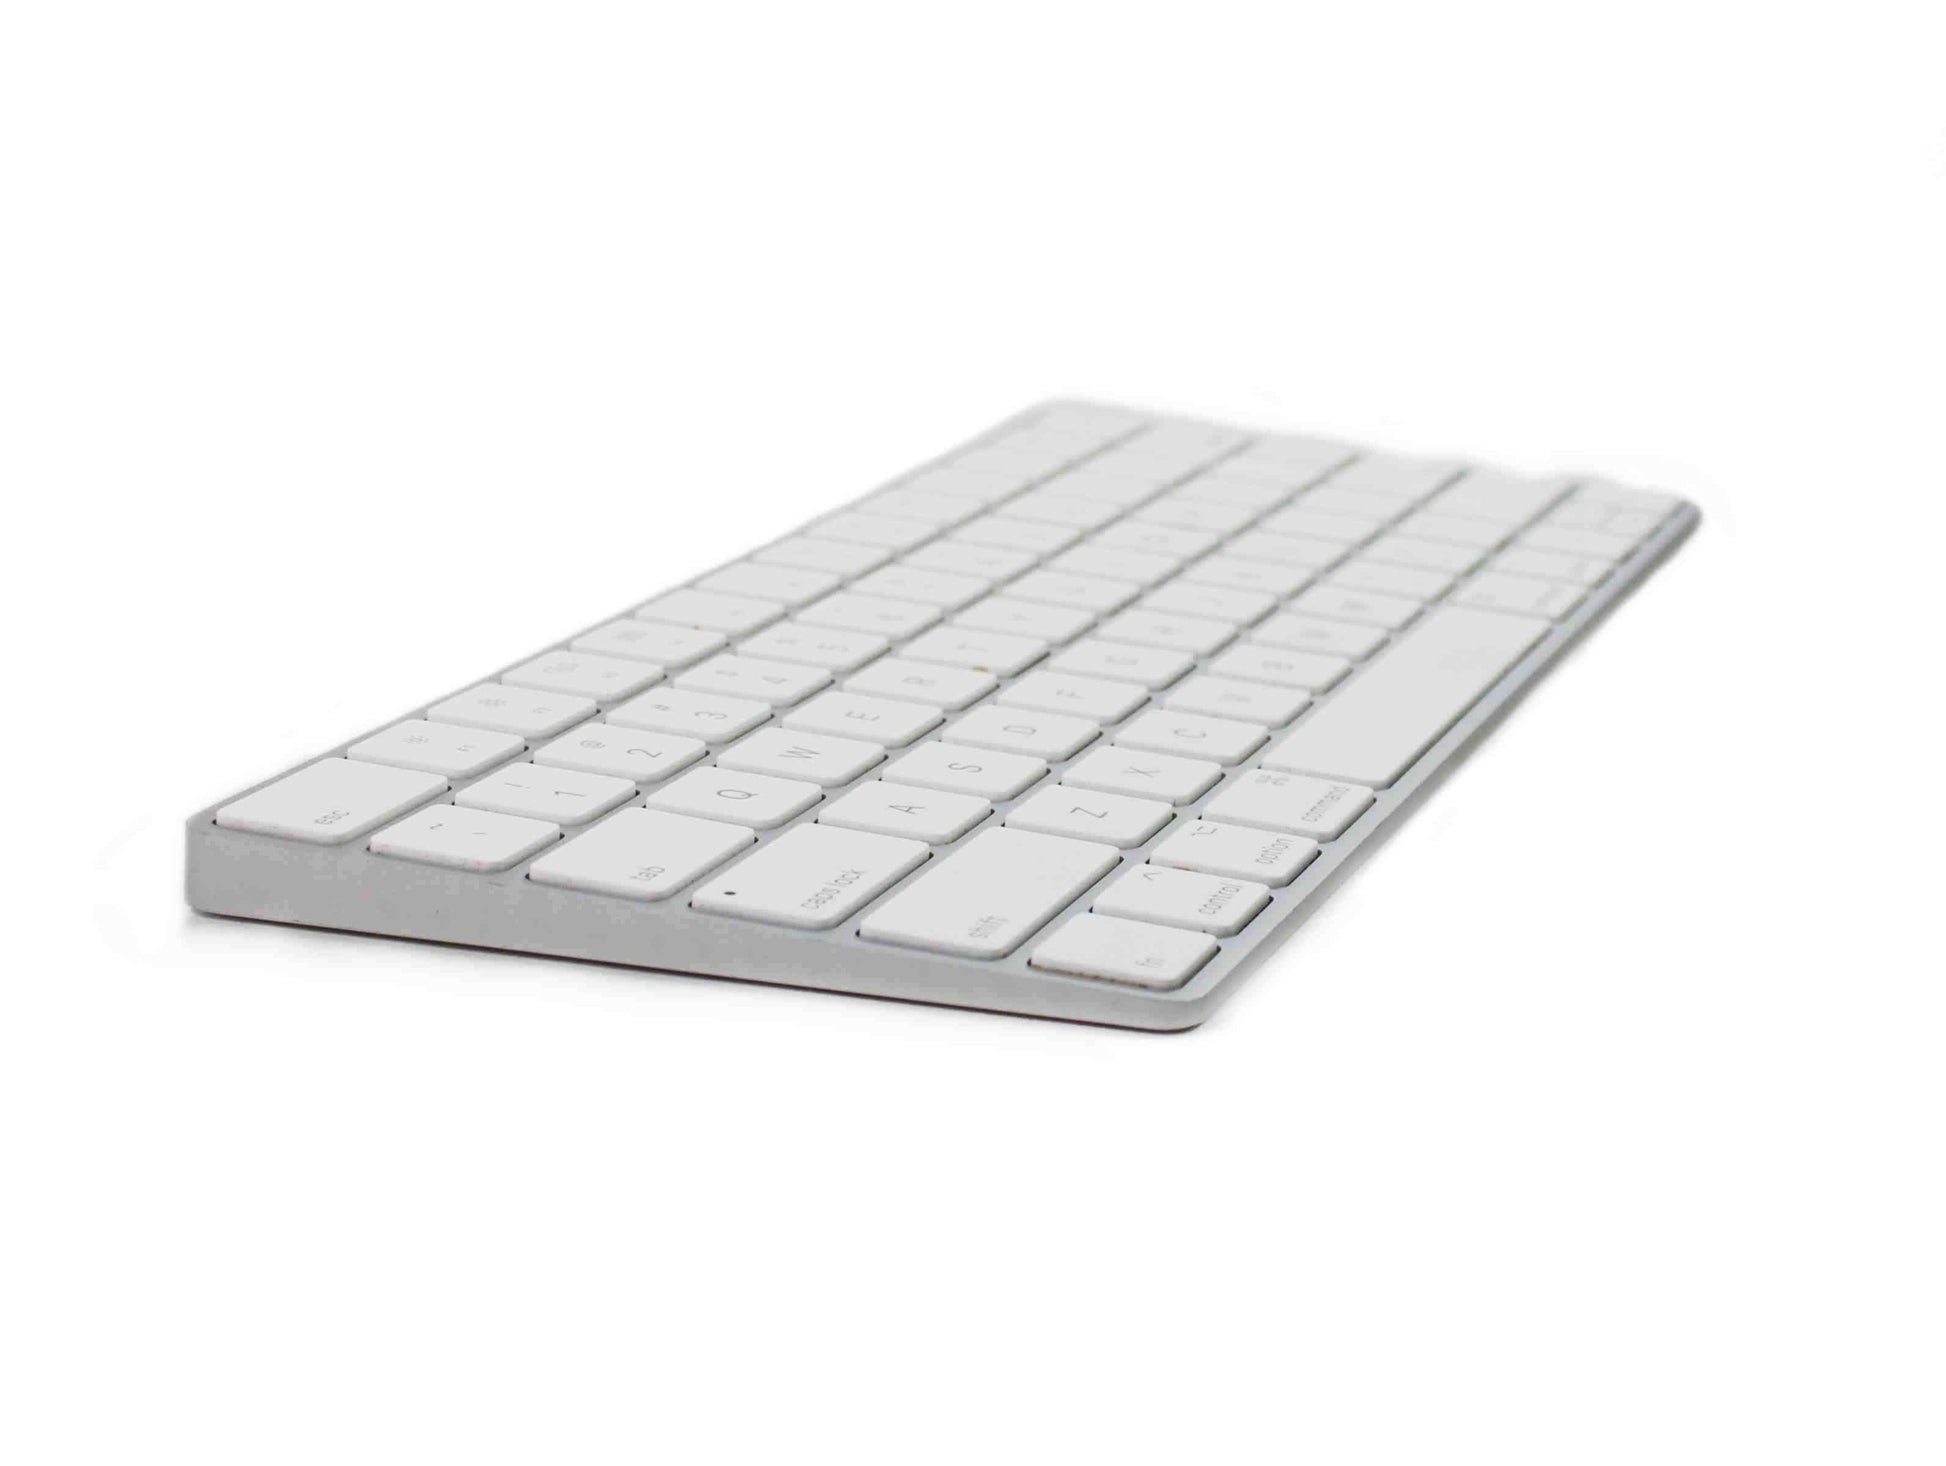 New Apple Magic Keyboard 2 Rechargeable Bluetooth Wireless A1644 MLA22LL/A